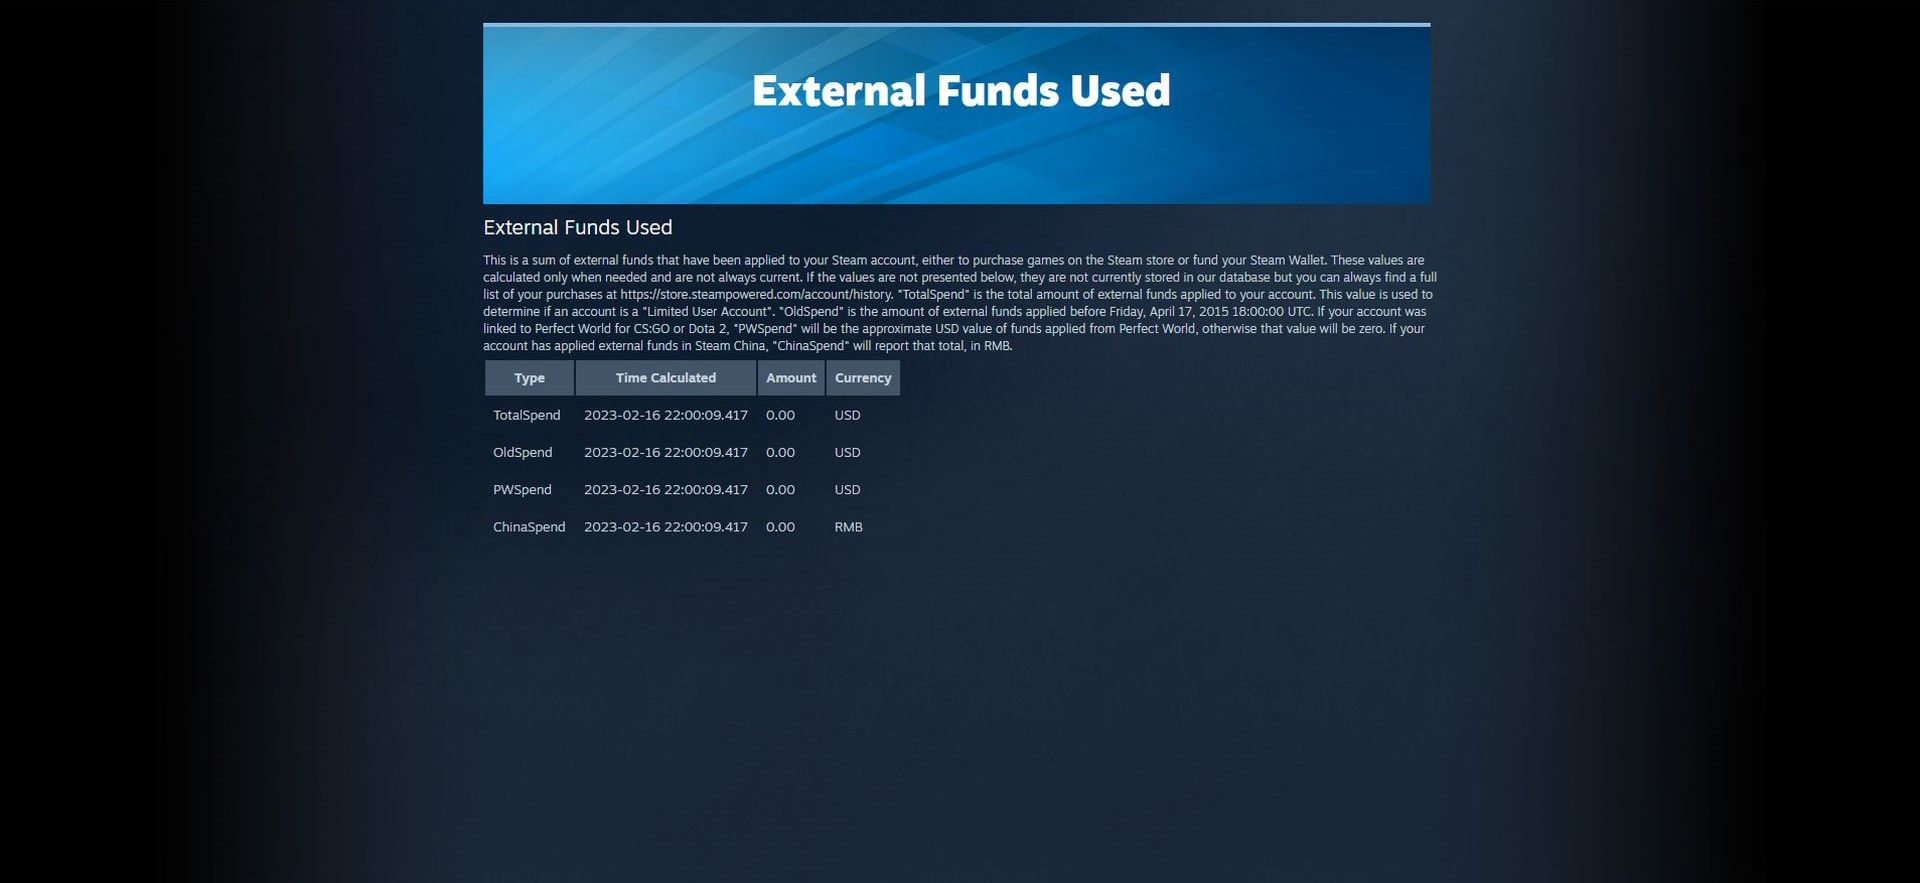 Is Steam external funds used accurate: (Image credit)